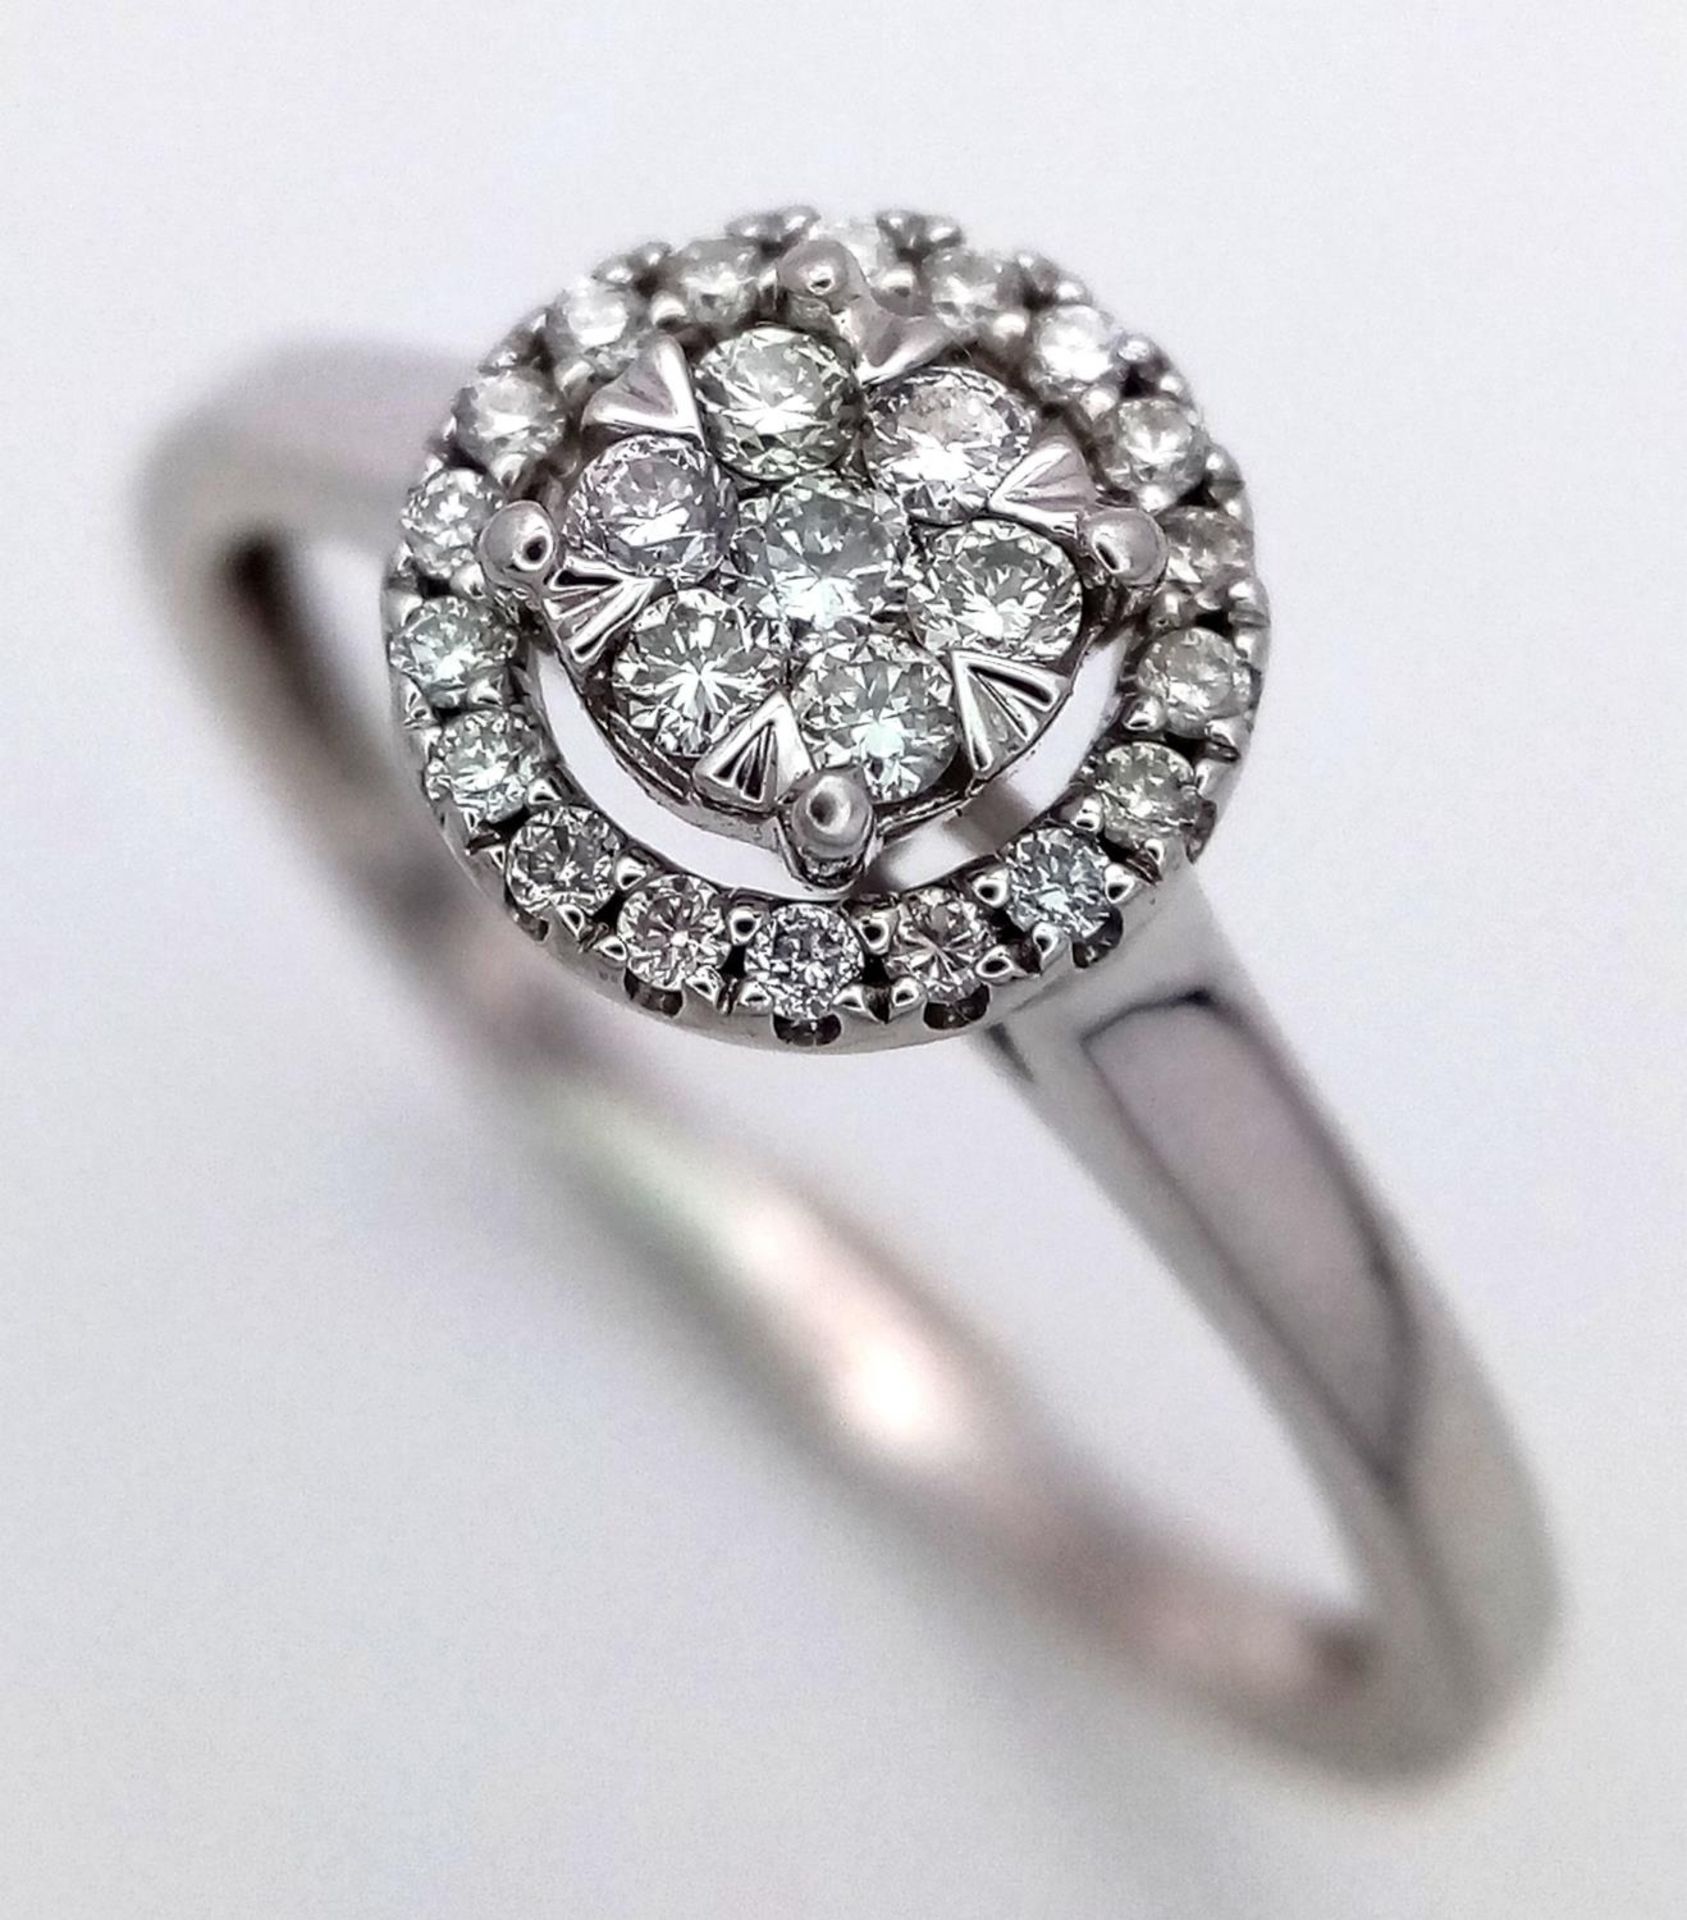 A 9K White Gold Diamond Cluster Ring. A circle of round cut diamonds with a halo of smaller round - Bild 3 aus 5